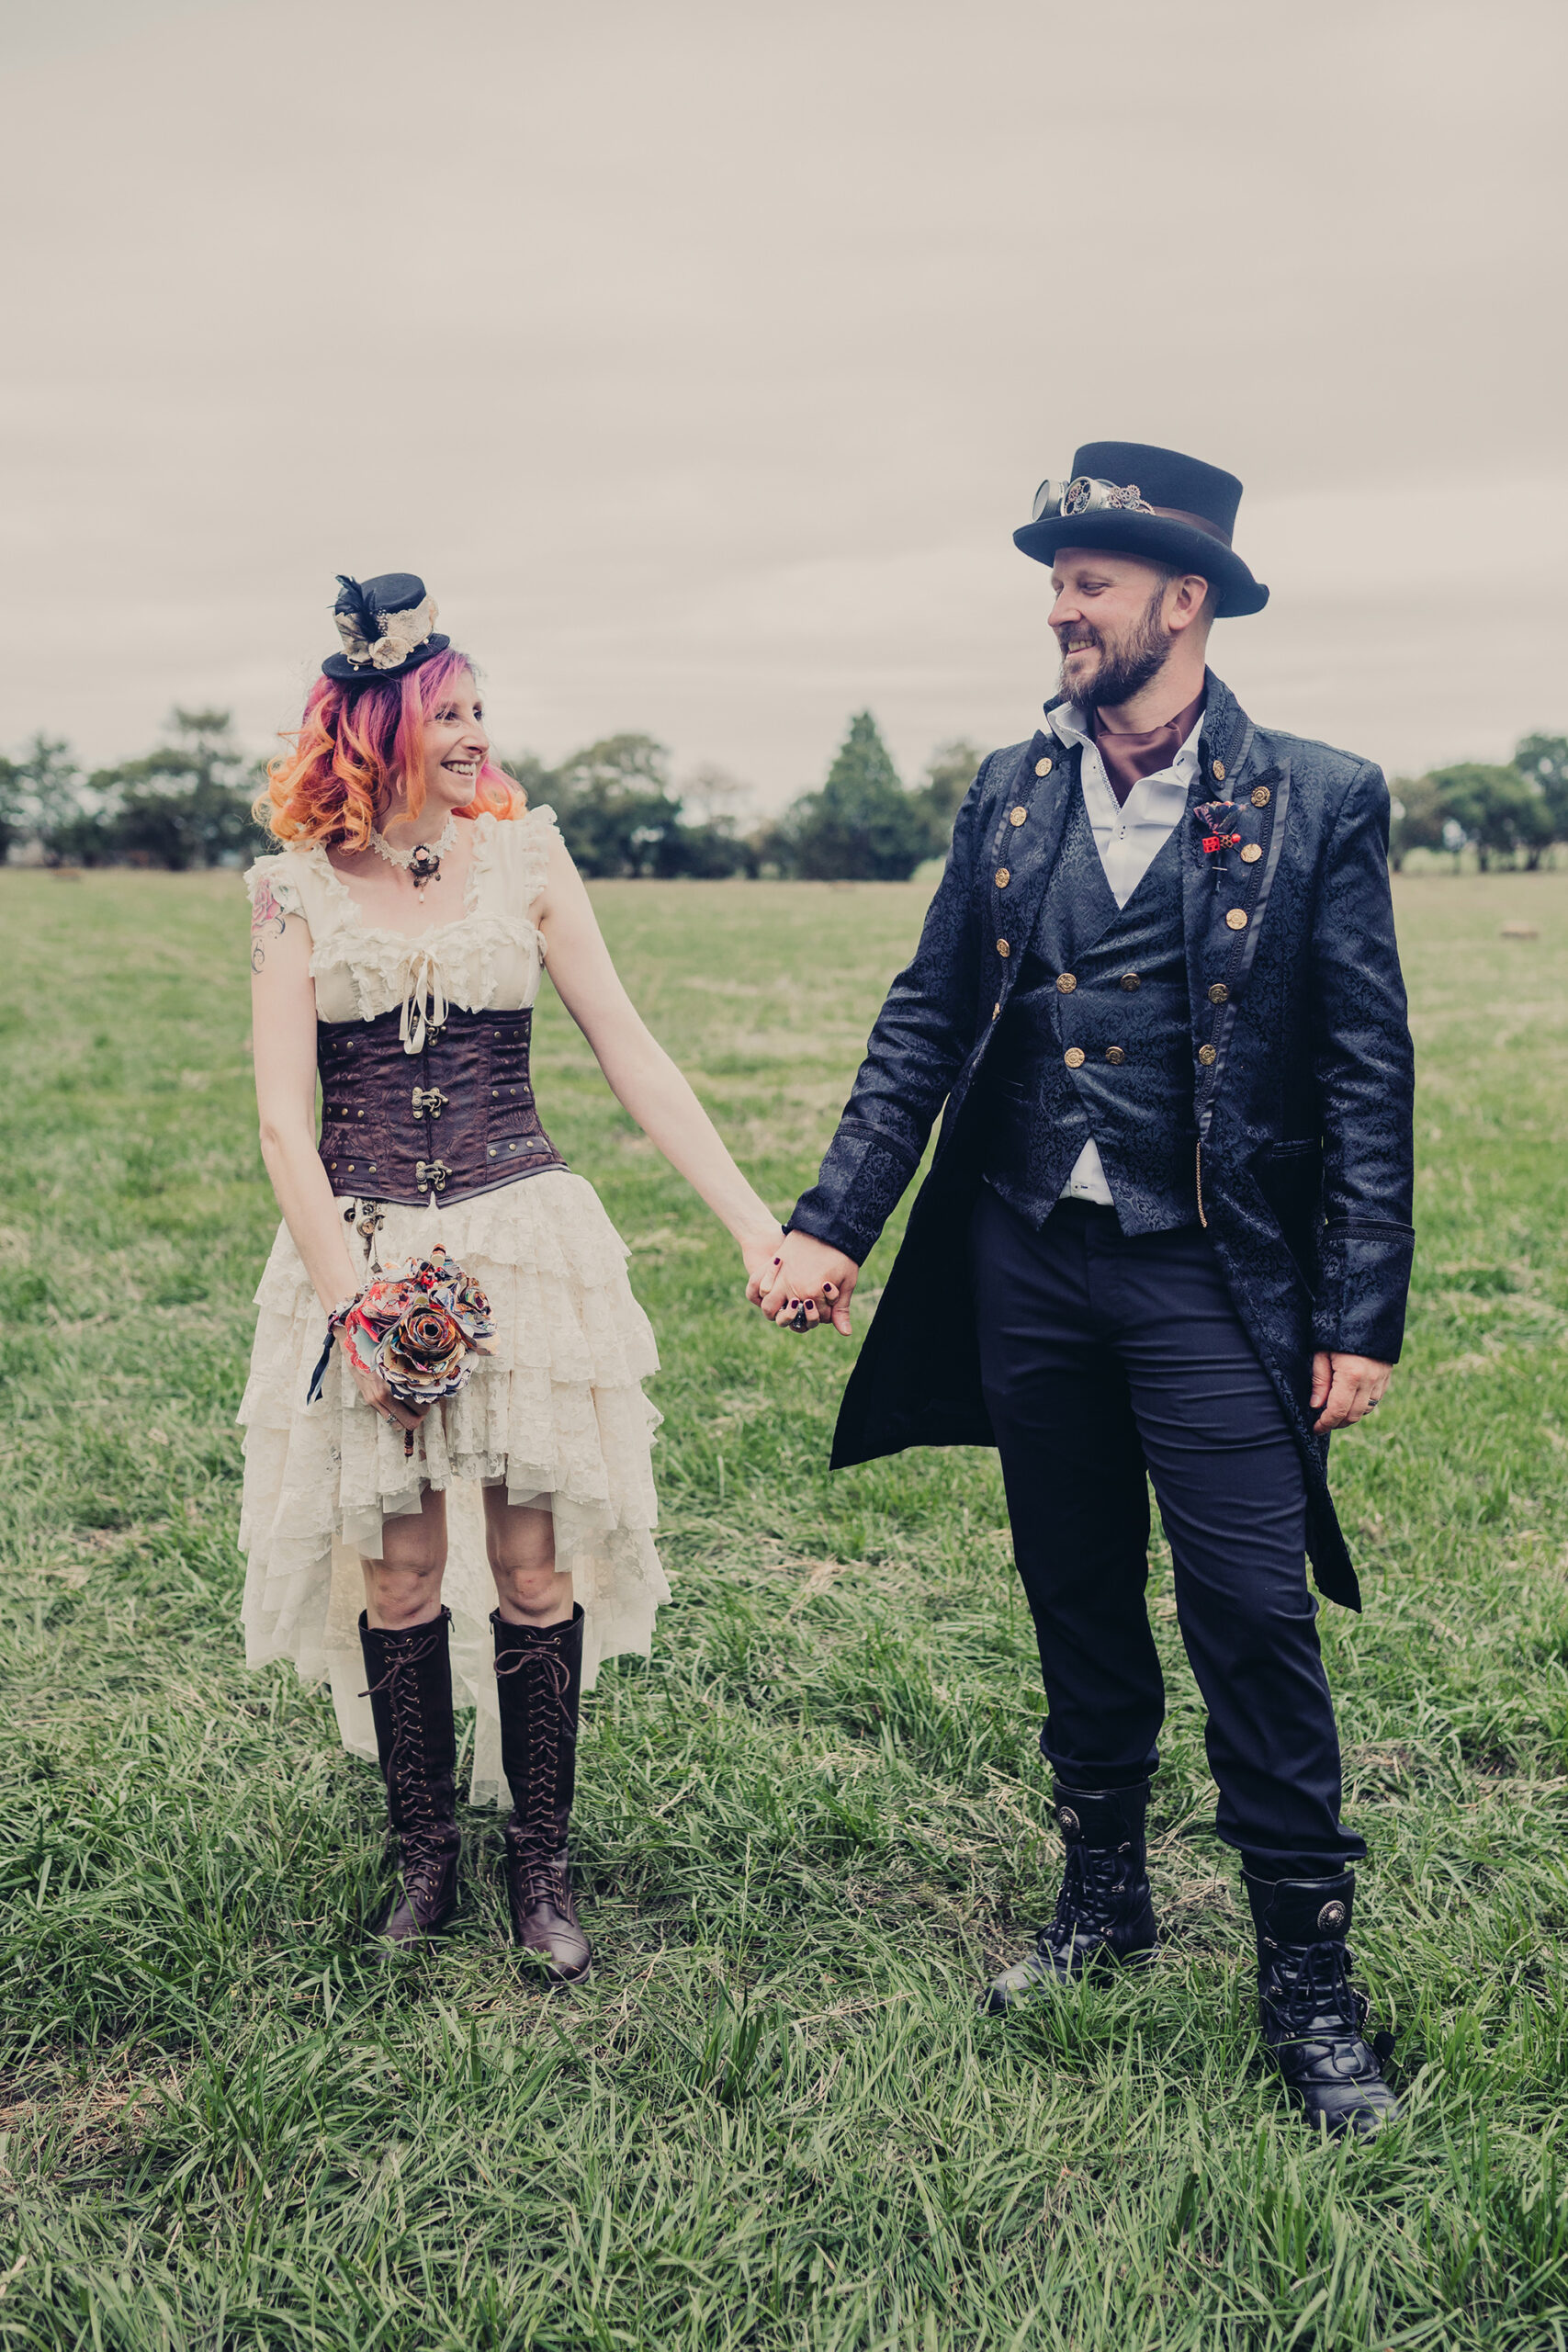 April Rien Steampunk Festival Wedding Chelsea Shoesmith Photography SBS 022 scaled